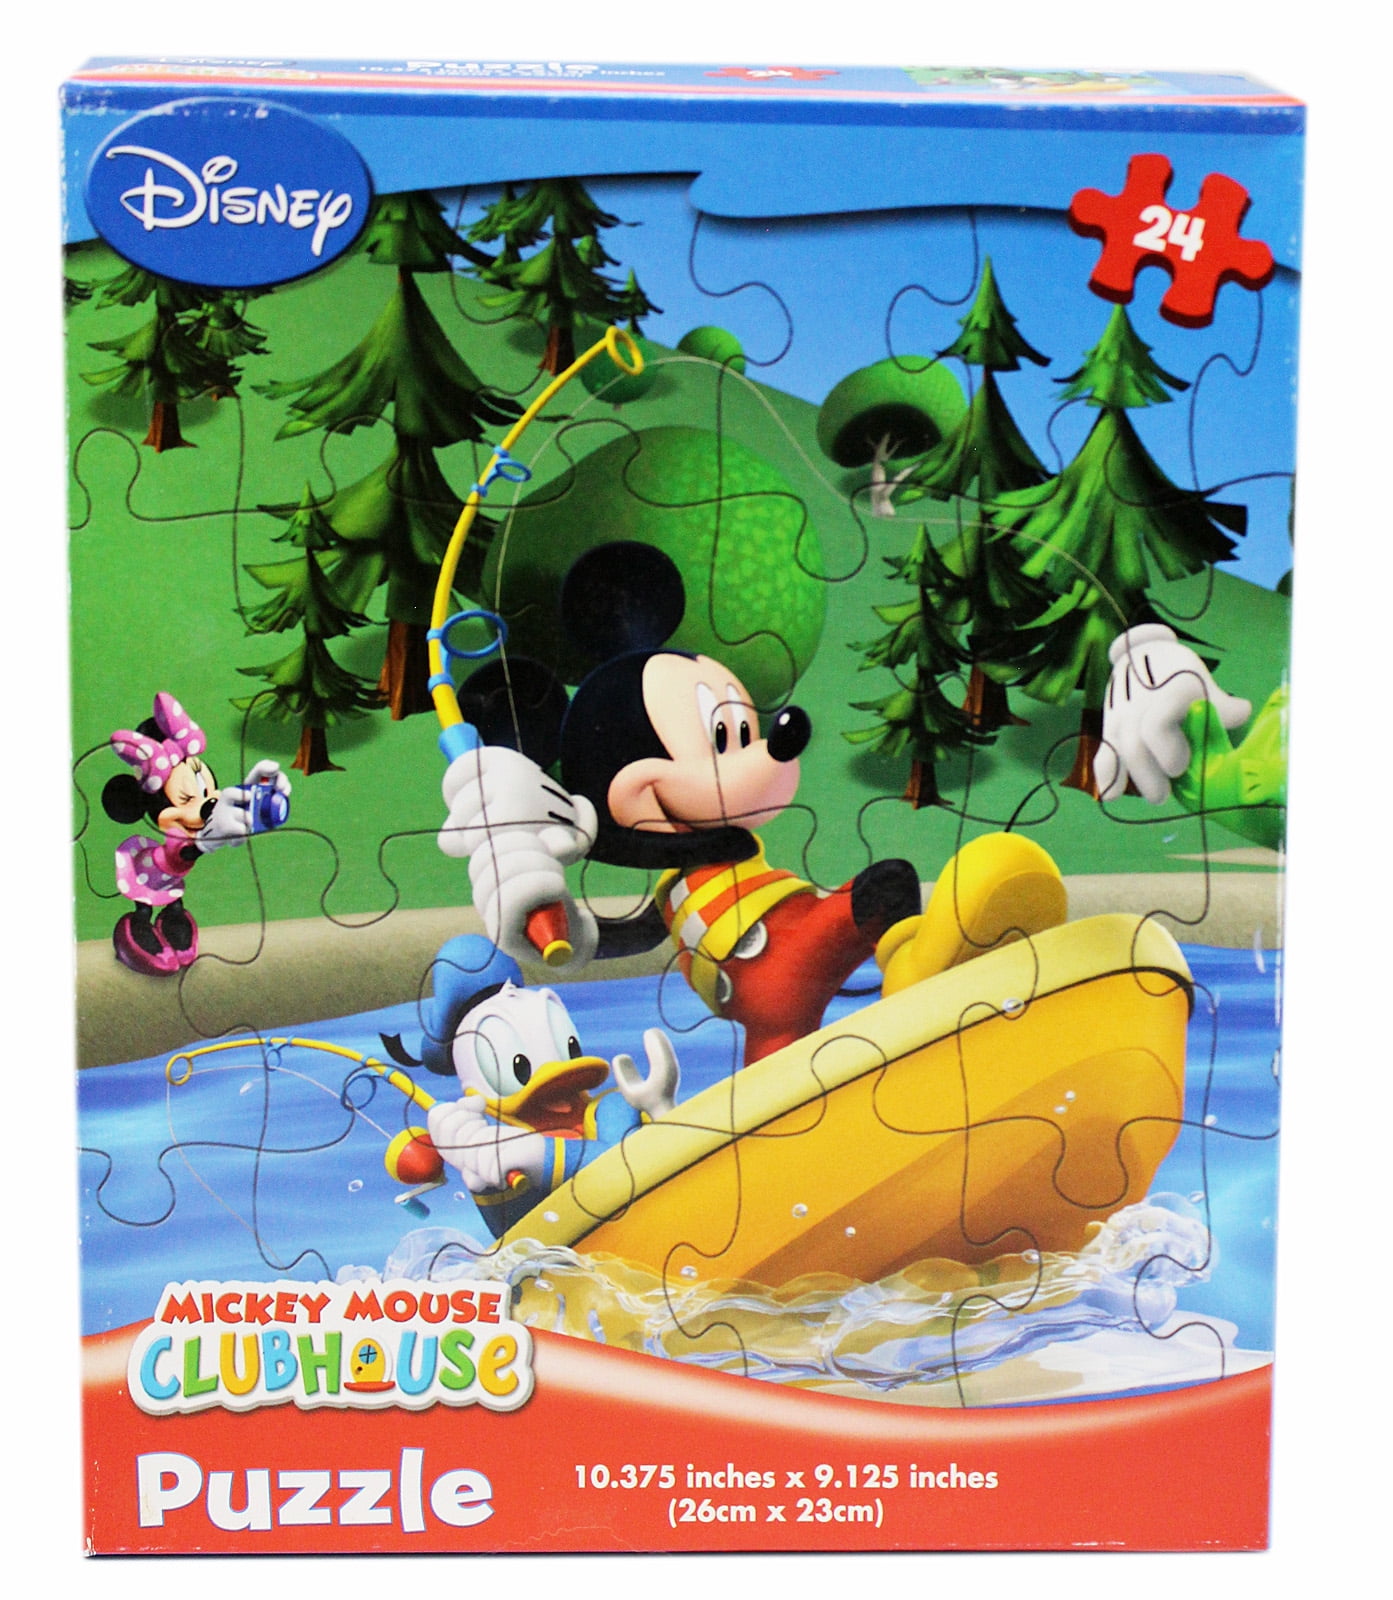 Find Mickey Mouse Game, Amscan 996859, 1 Piece